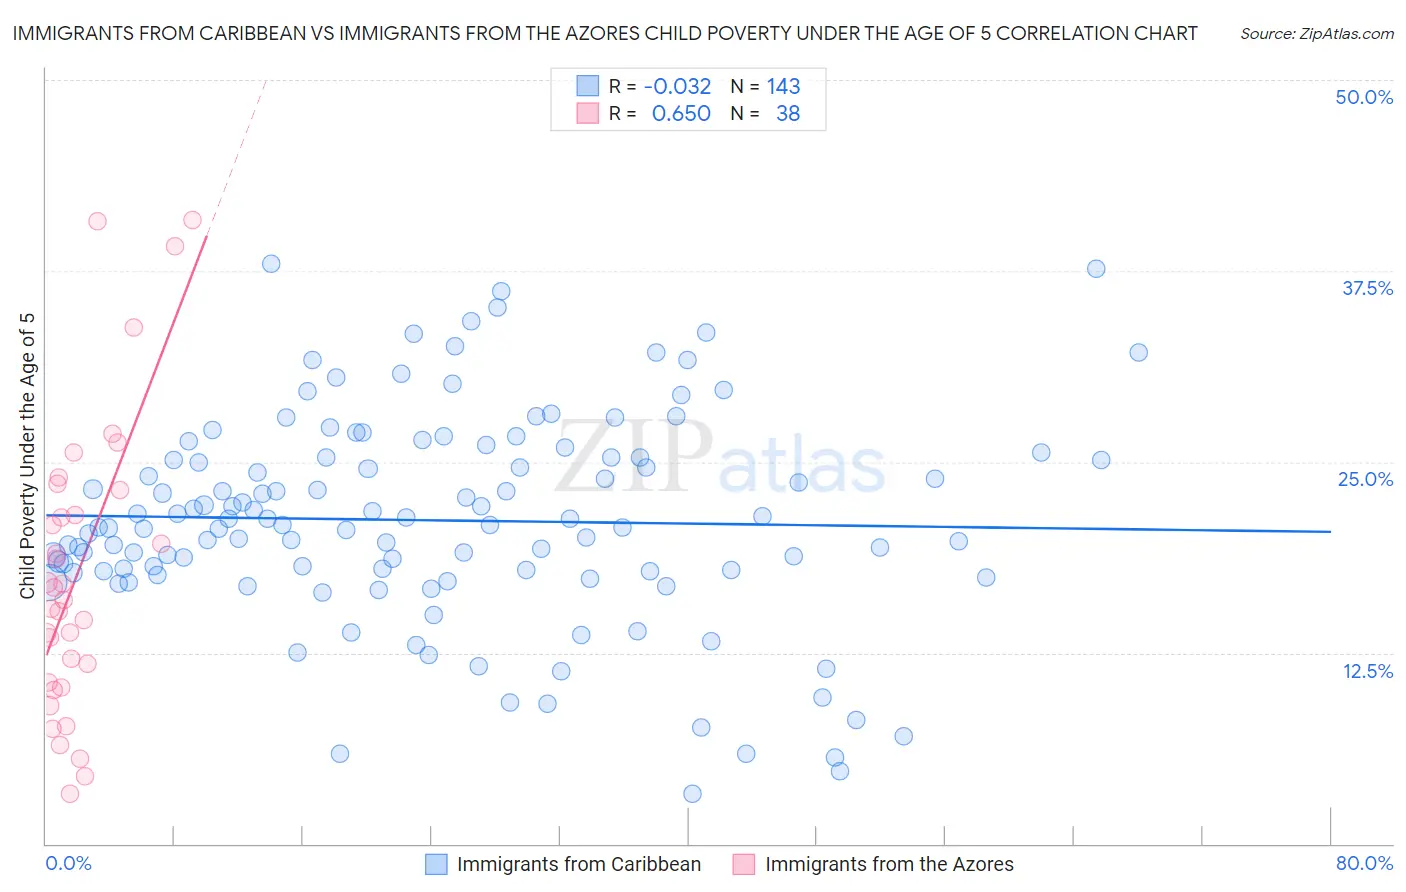 Immigrants from Caribbean vs Immigrants from the Azores Child Poverty Under the Age of 5